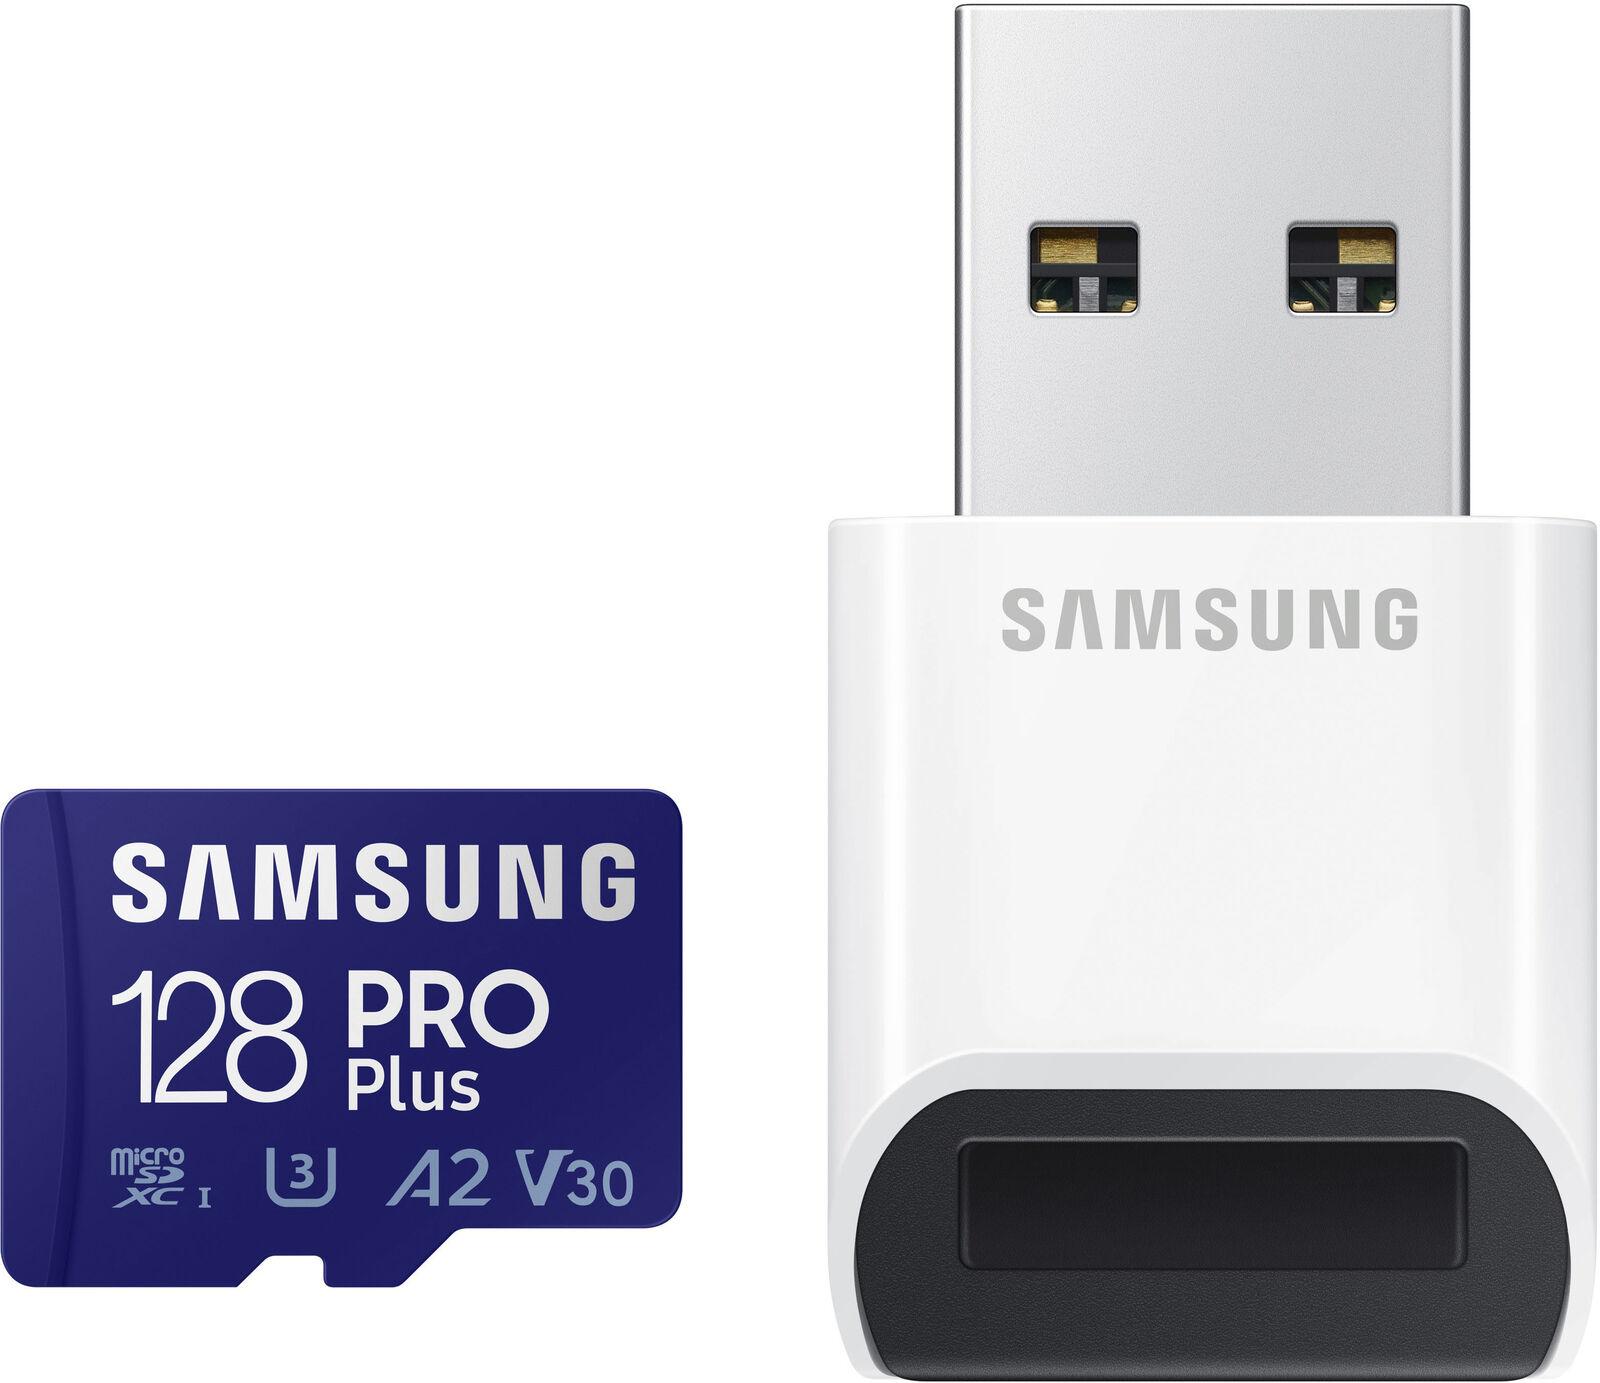 128GB Samsung Pro Plus A2 V30 microSDXC Memory Card with Reader for $15.99 Shipped